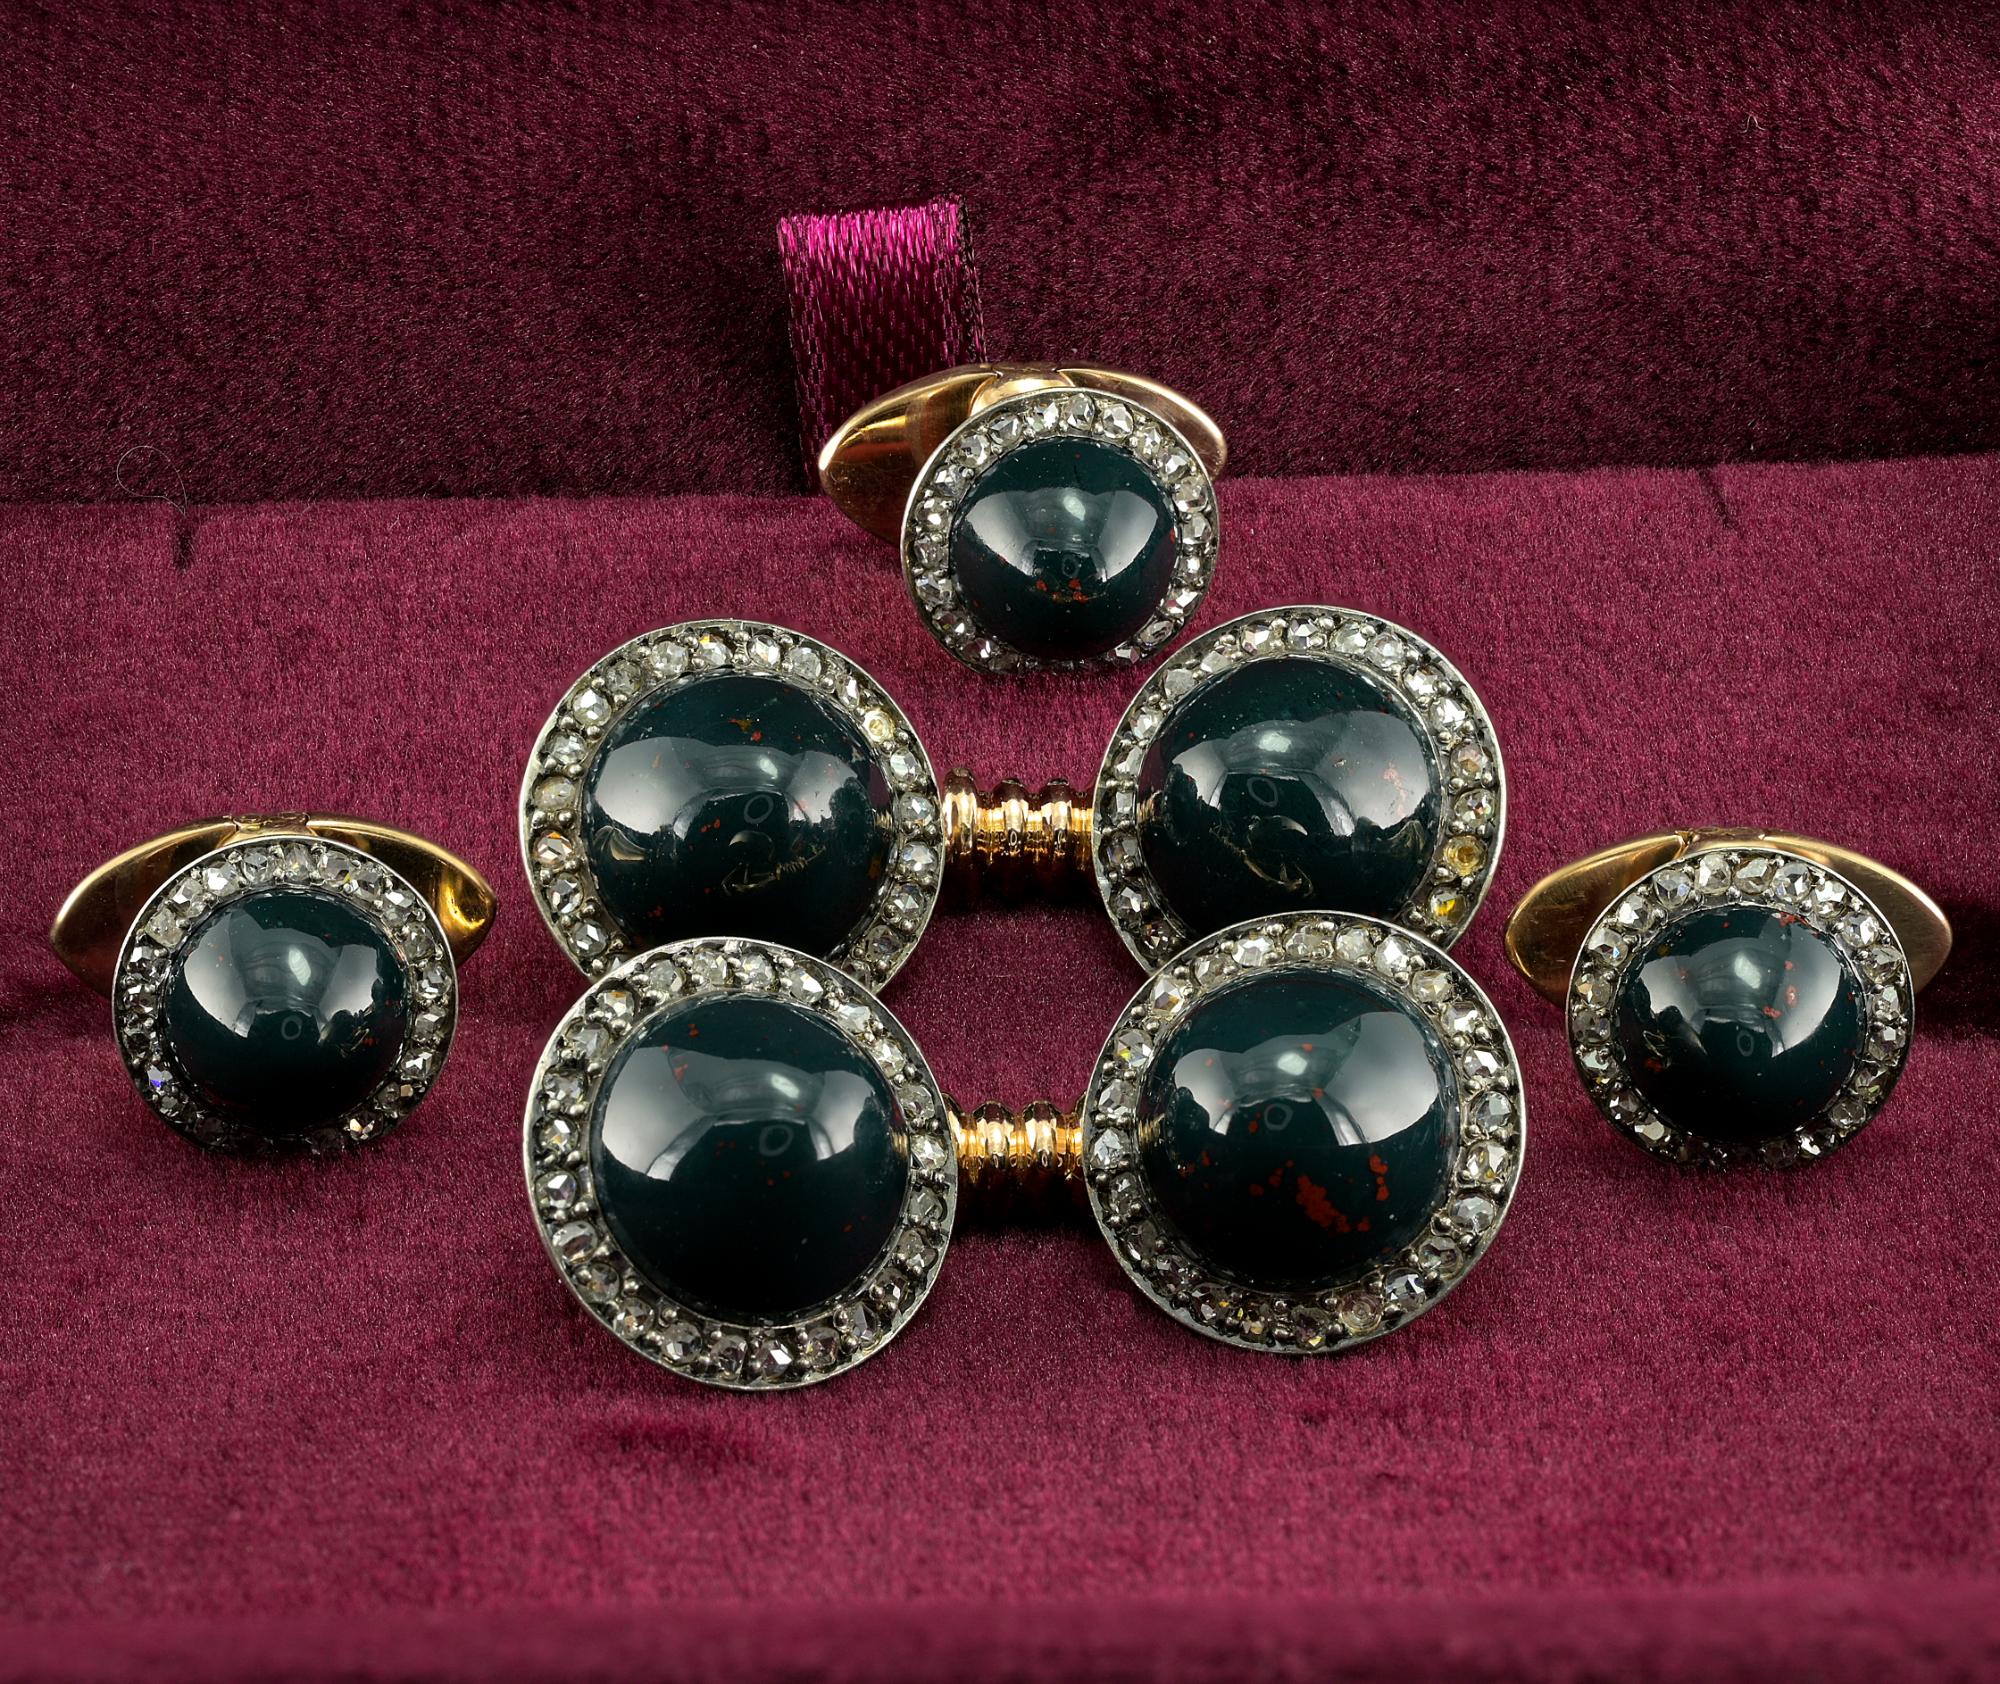 Antique Victorian era gent cufflink set, 1900 circa
Hand crafted during the time of solid 18 KT gold, Diamond set on silver over gold
Comprising cufflinks and three studs for a complete set
Beautifully made with natural Jasper and rose cut Diamonds